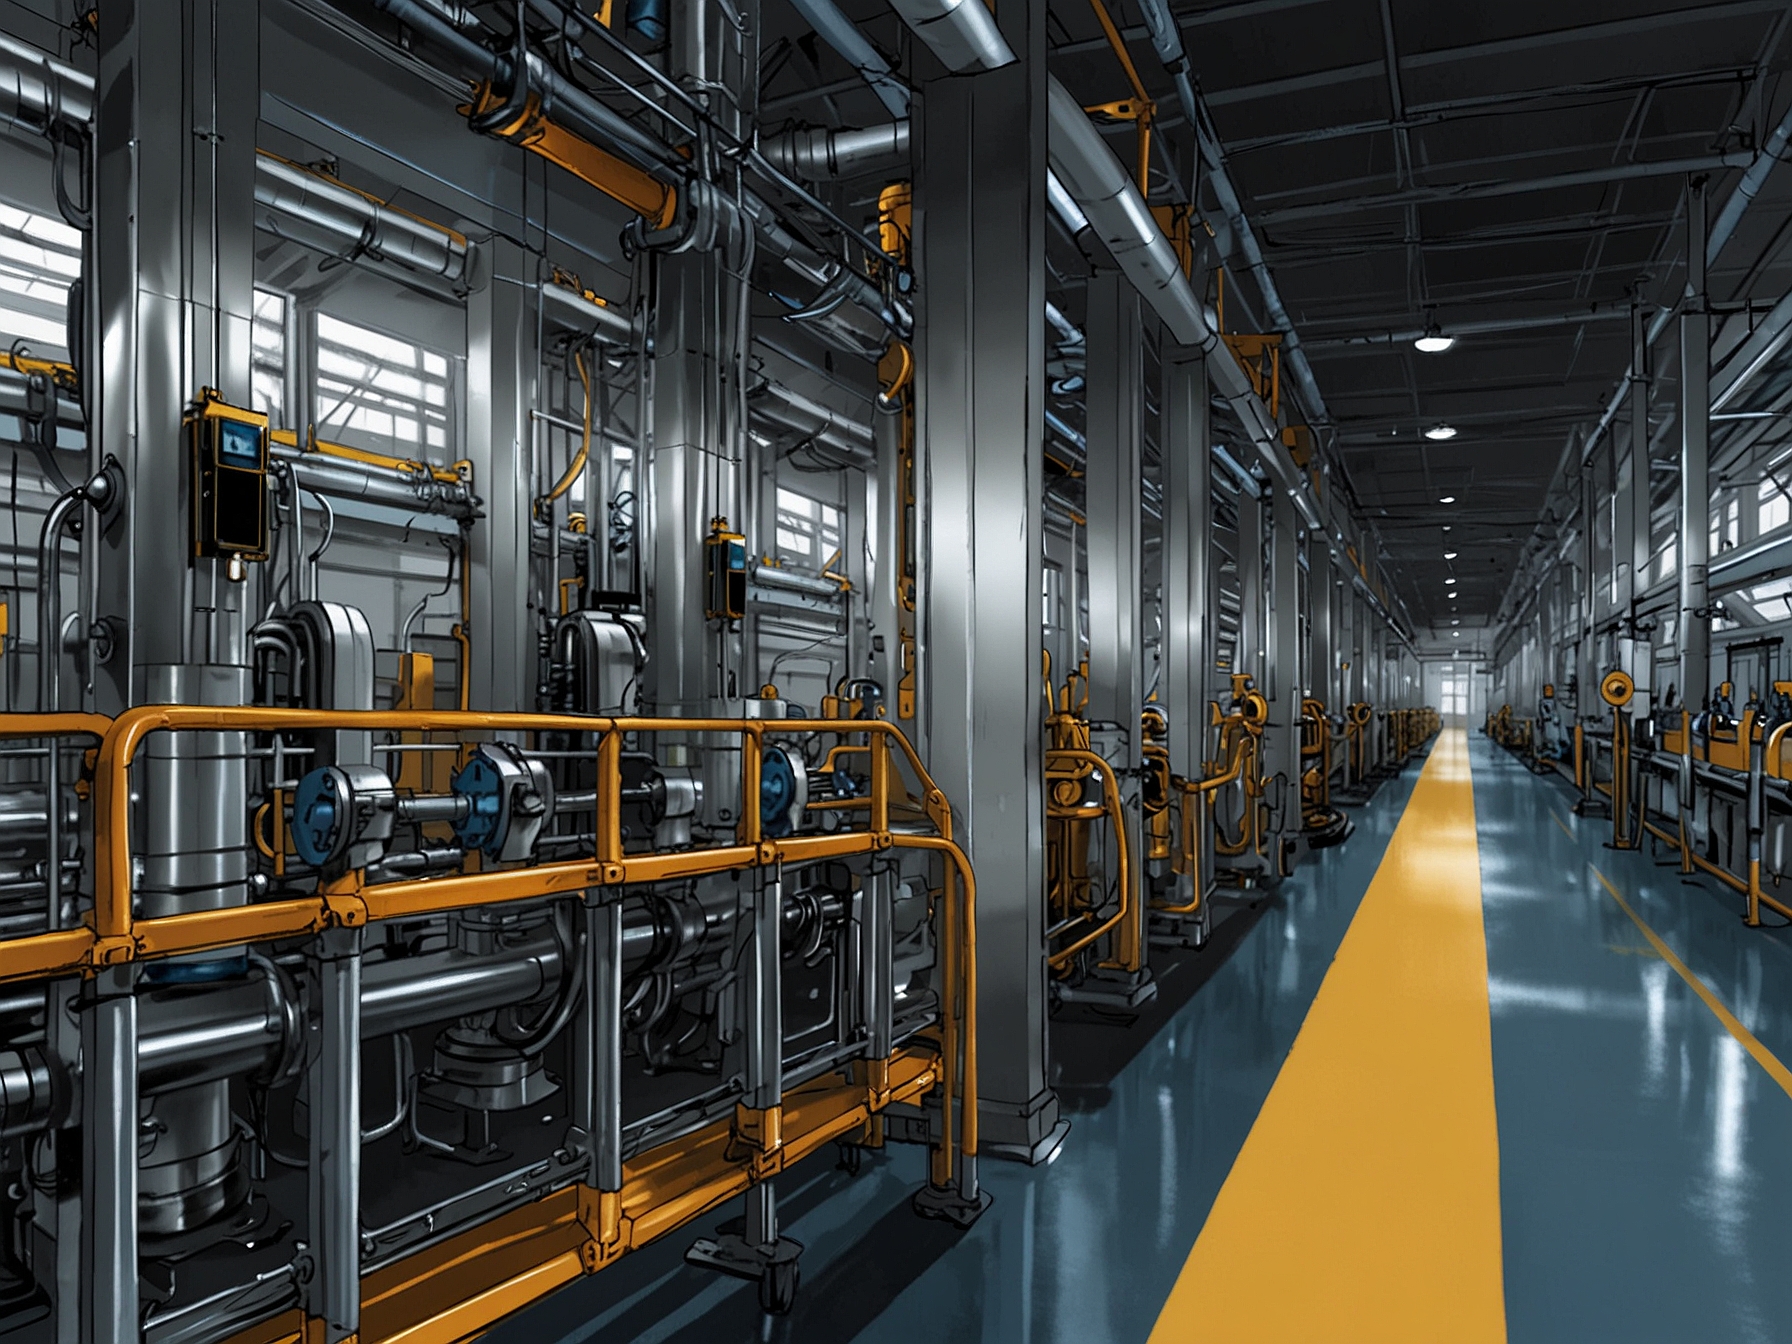 A high-tech manufacturing plant featuring automated machinery used in the UNIGILITYTM Tubular High Pressure PE Process Technology, highlighting its advanced automation capabilities for enhanced safety and efficiency.